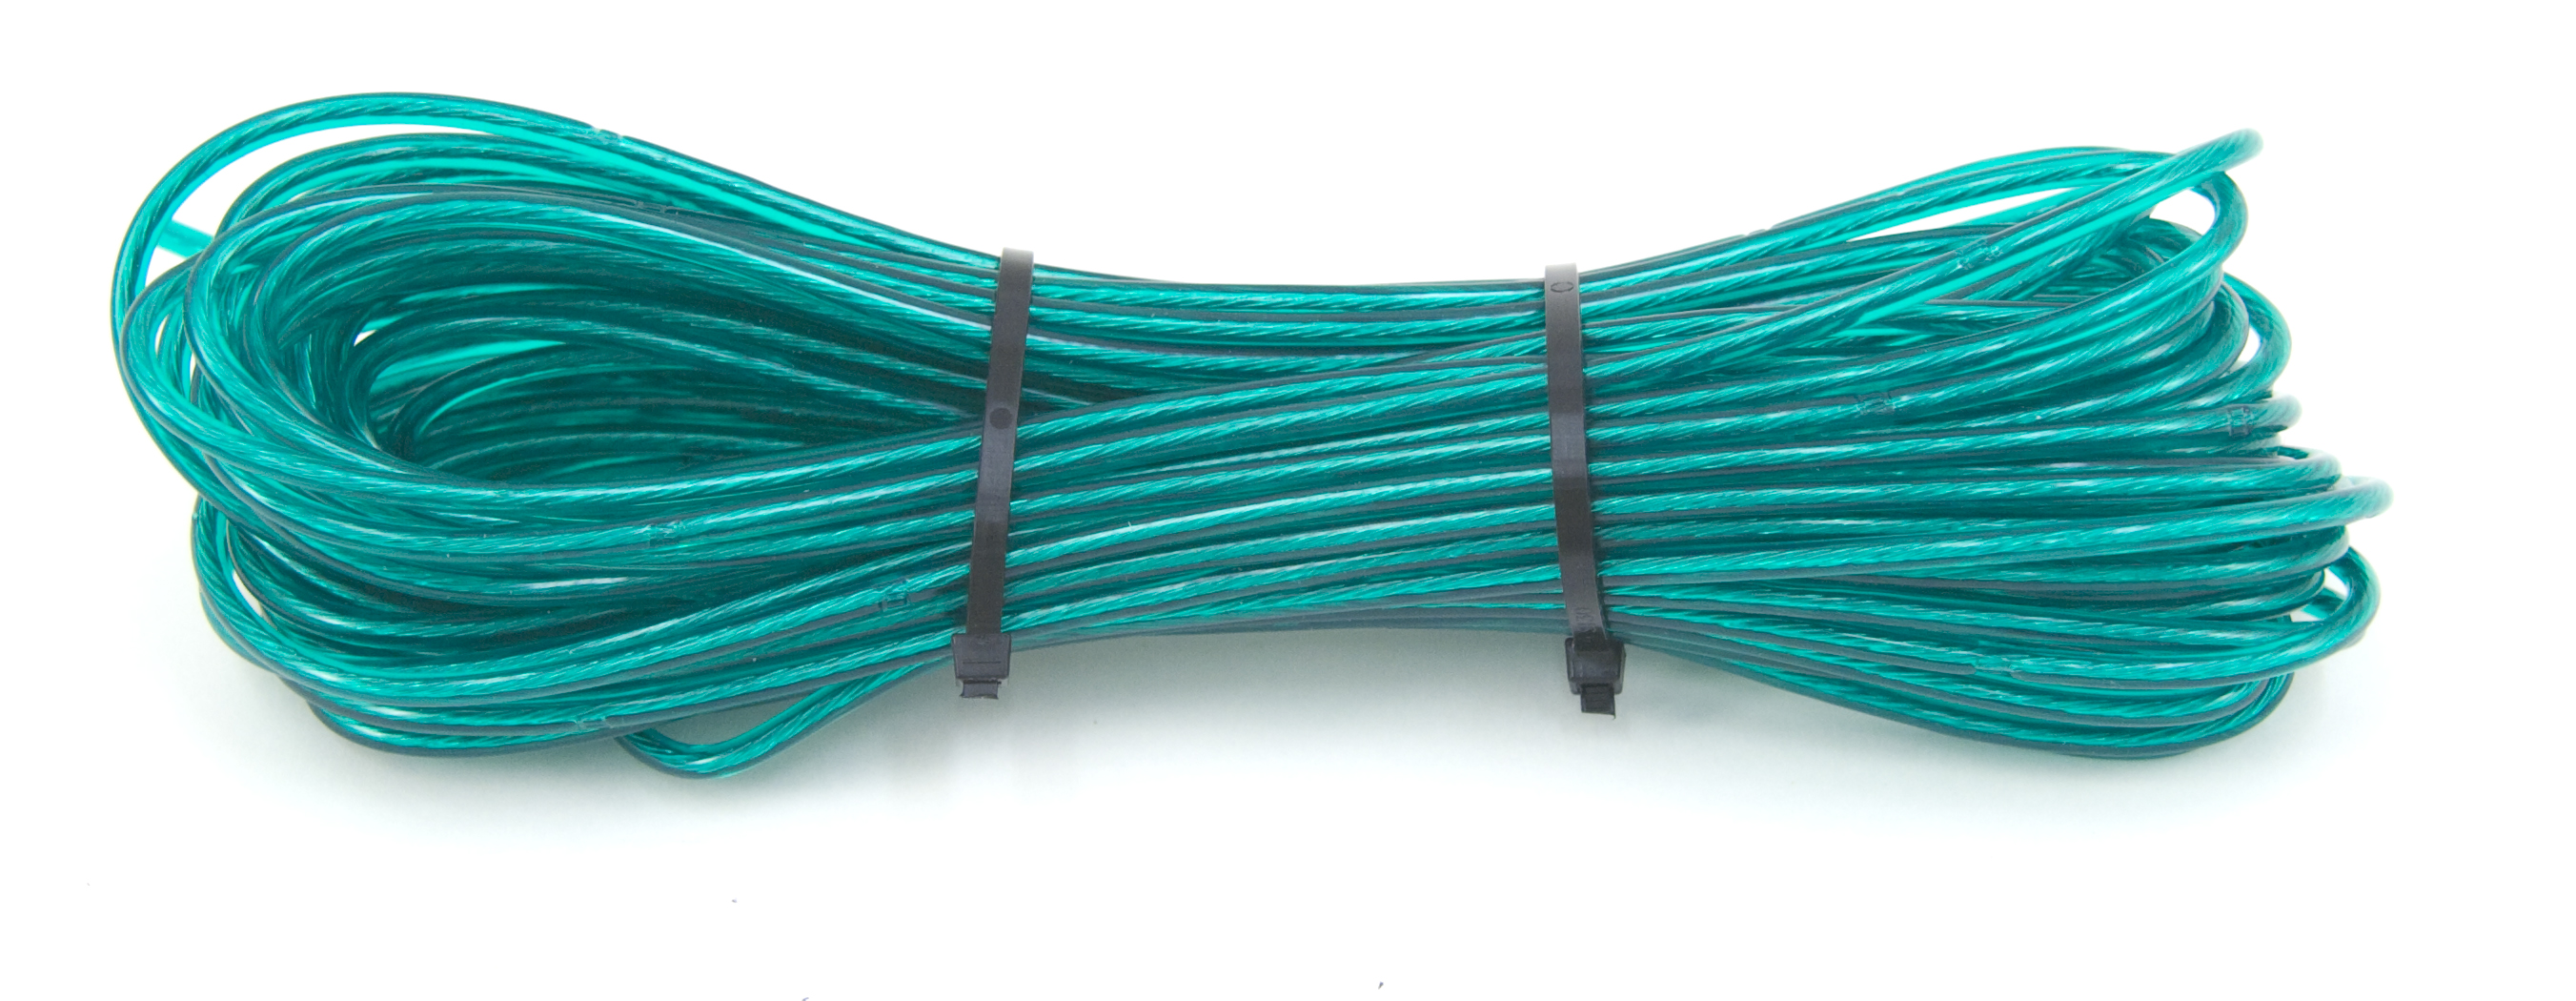 PVC COATED WIRE     5/32 X 50 GREEN